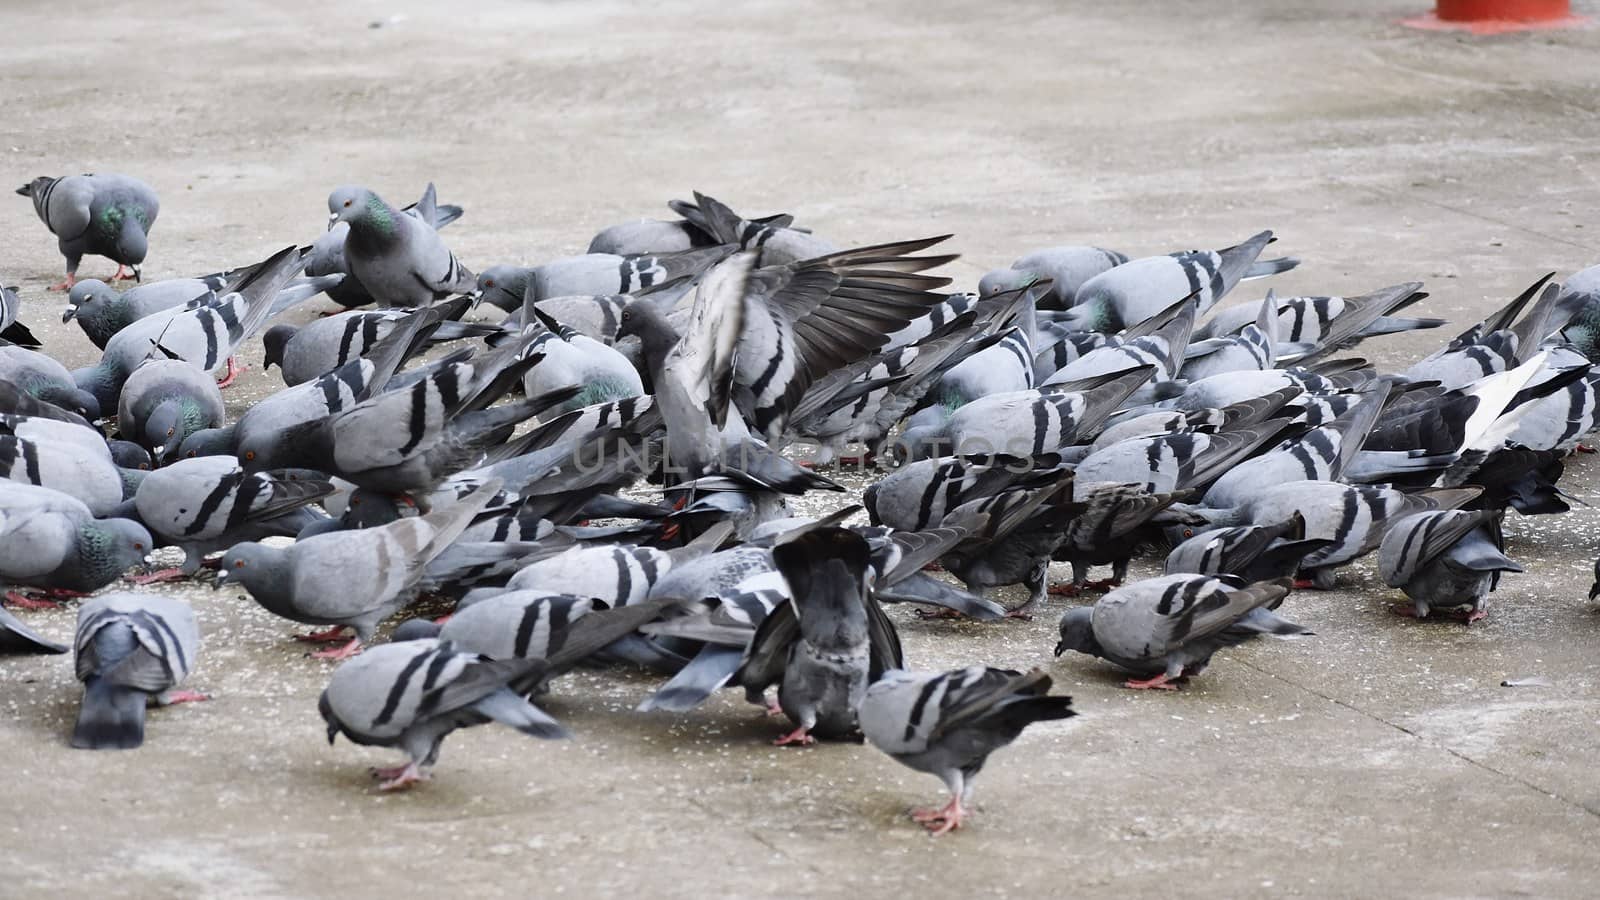 A Group of Pigeons in my ground by ravindrabhu165165@gmail.com